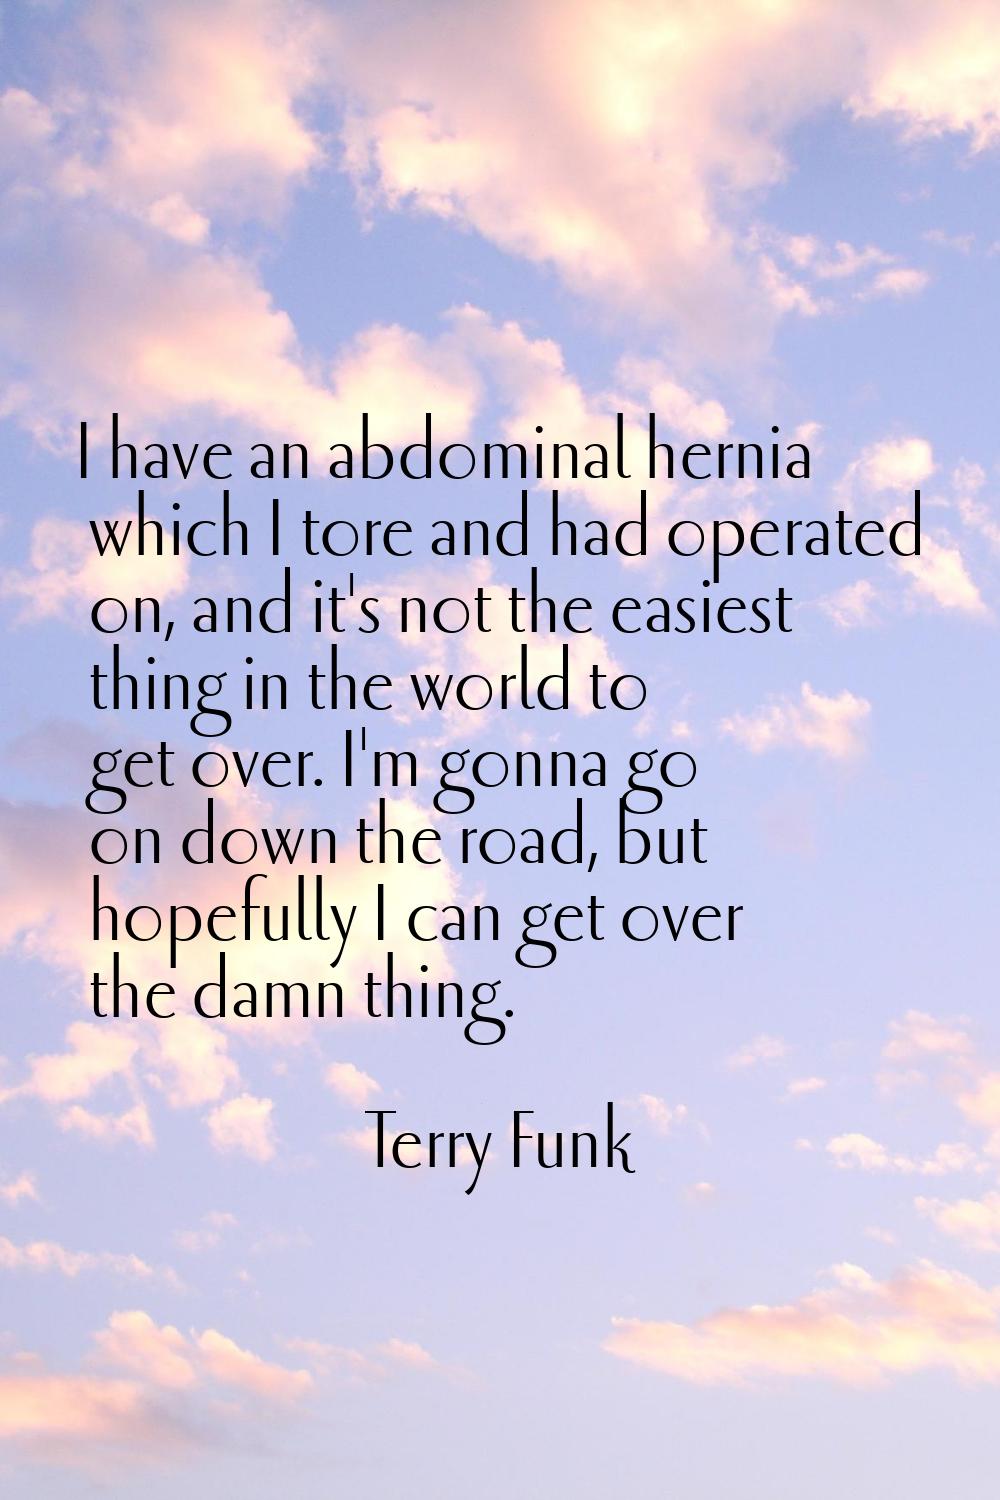 I have an abdominal hernia which I tore and had operated on, and it's not the easiest thing in the 